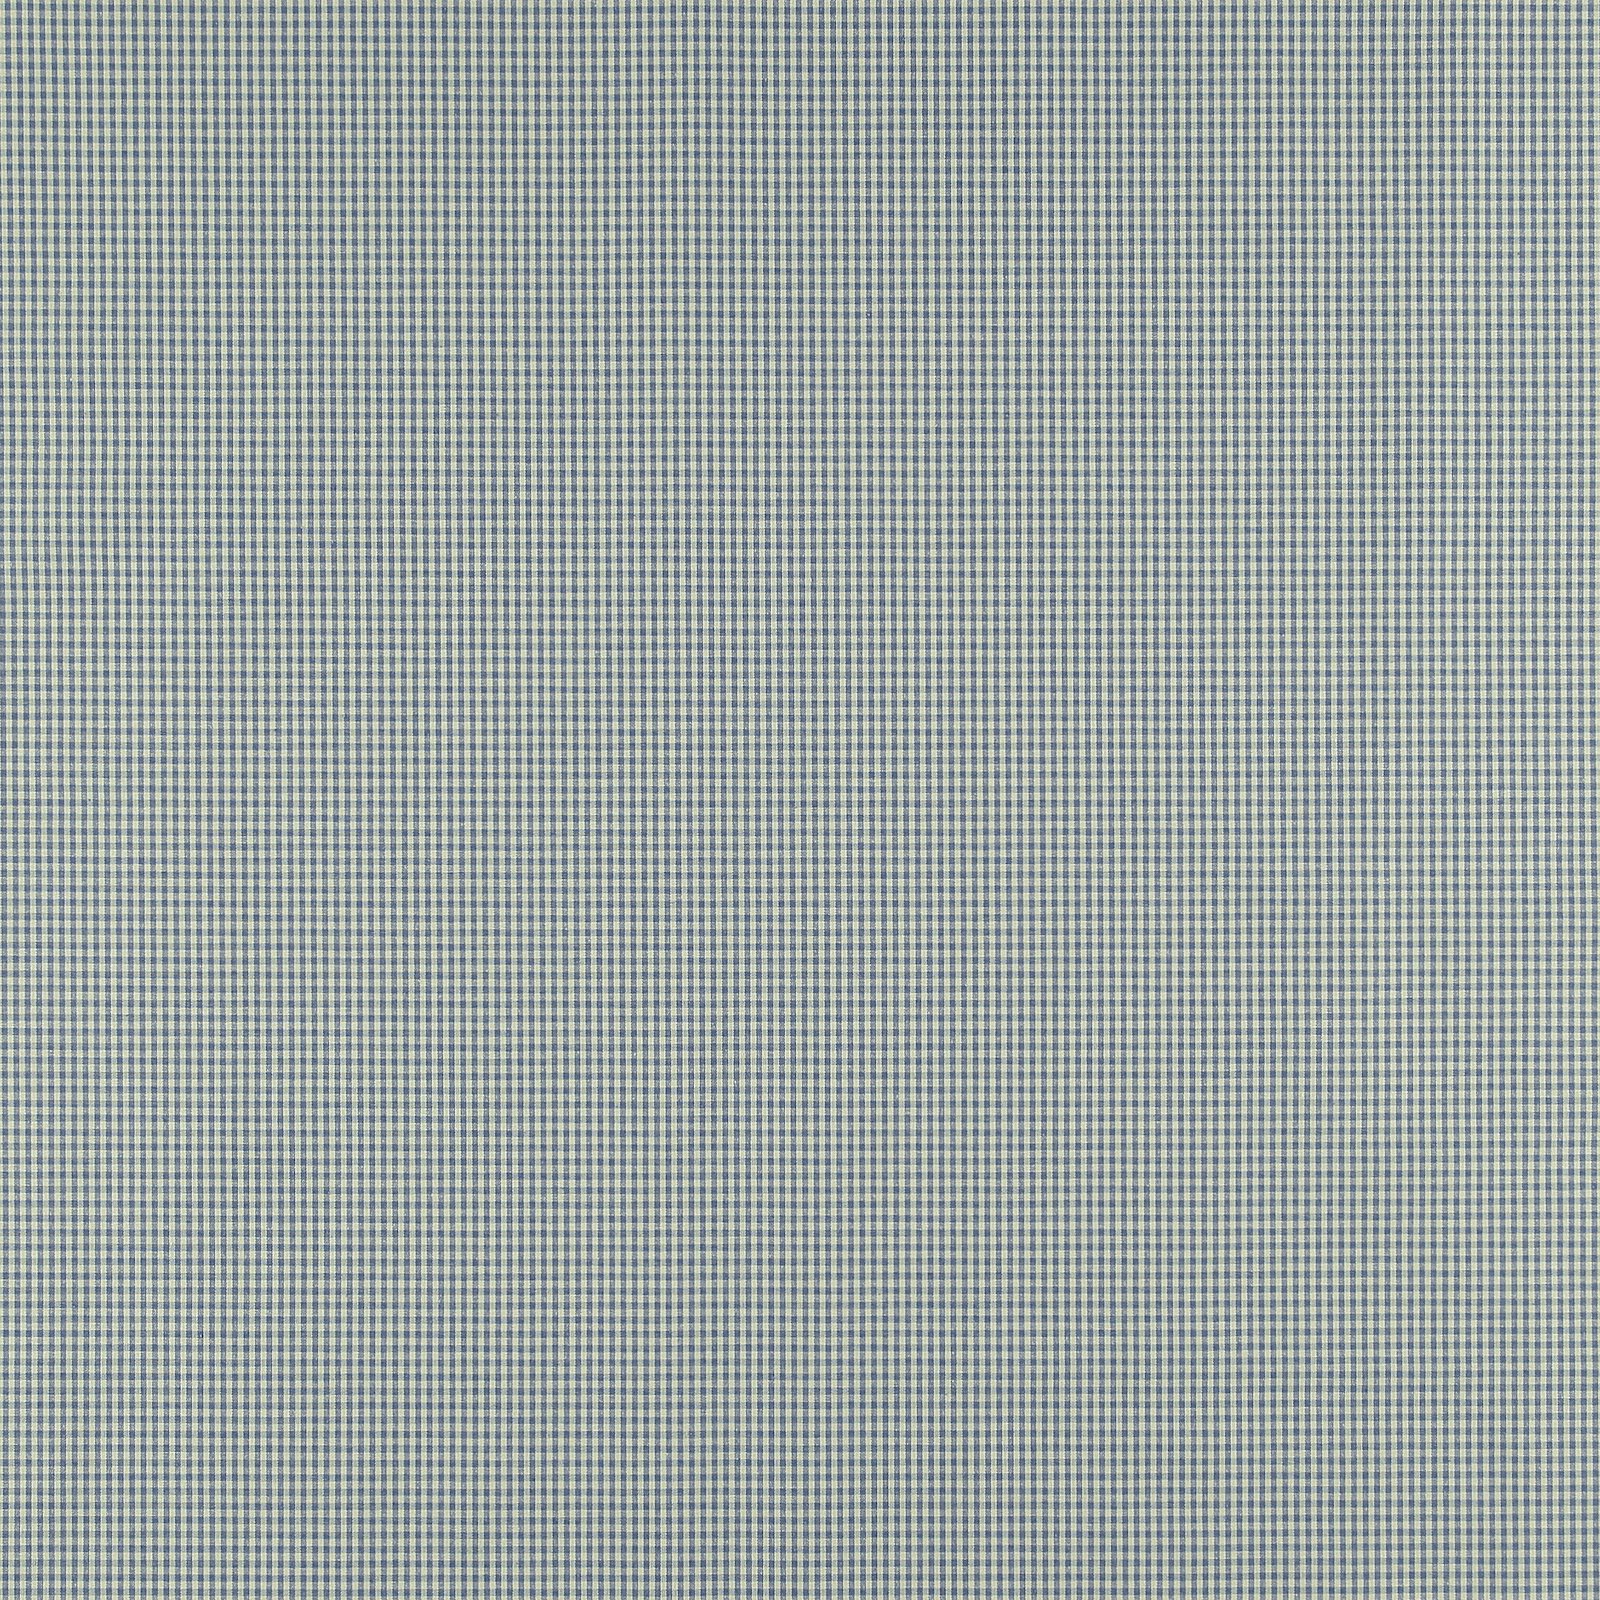 Yarn dyed light blue small check 820393_pack_sp